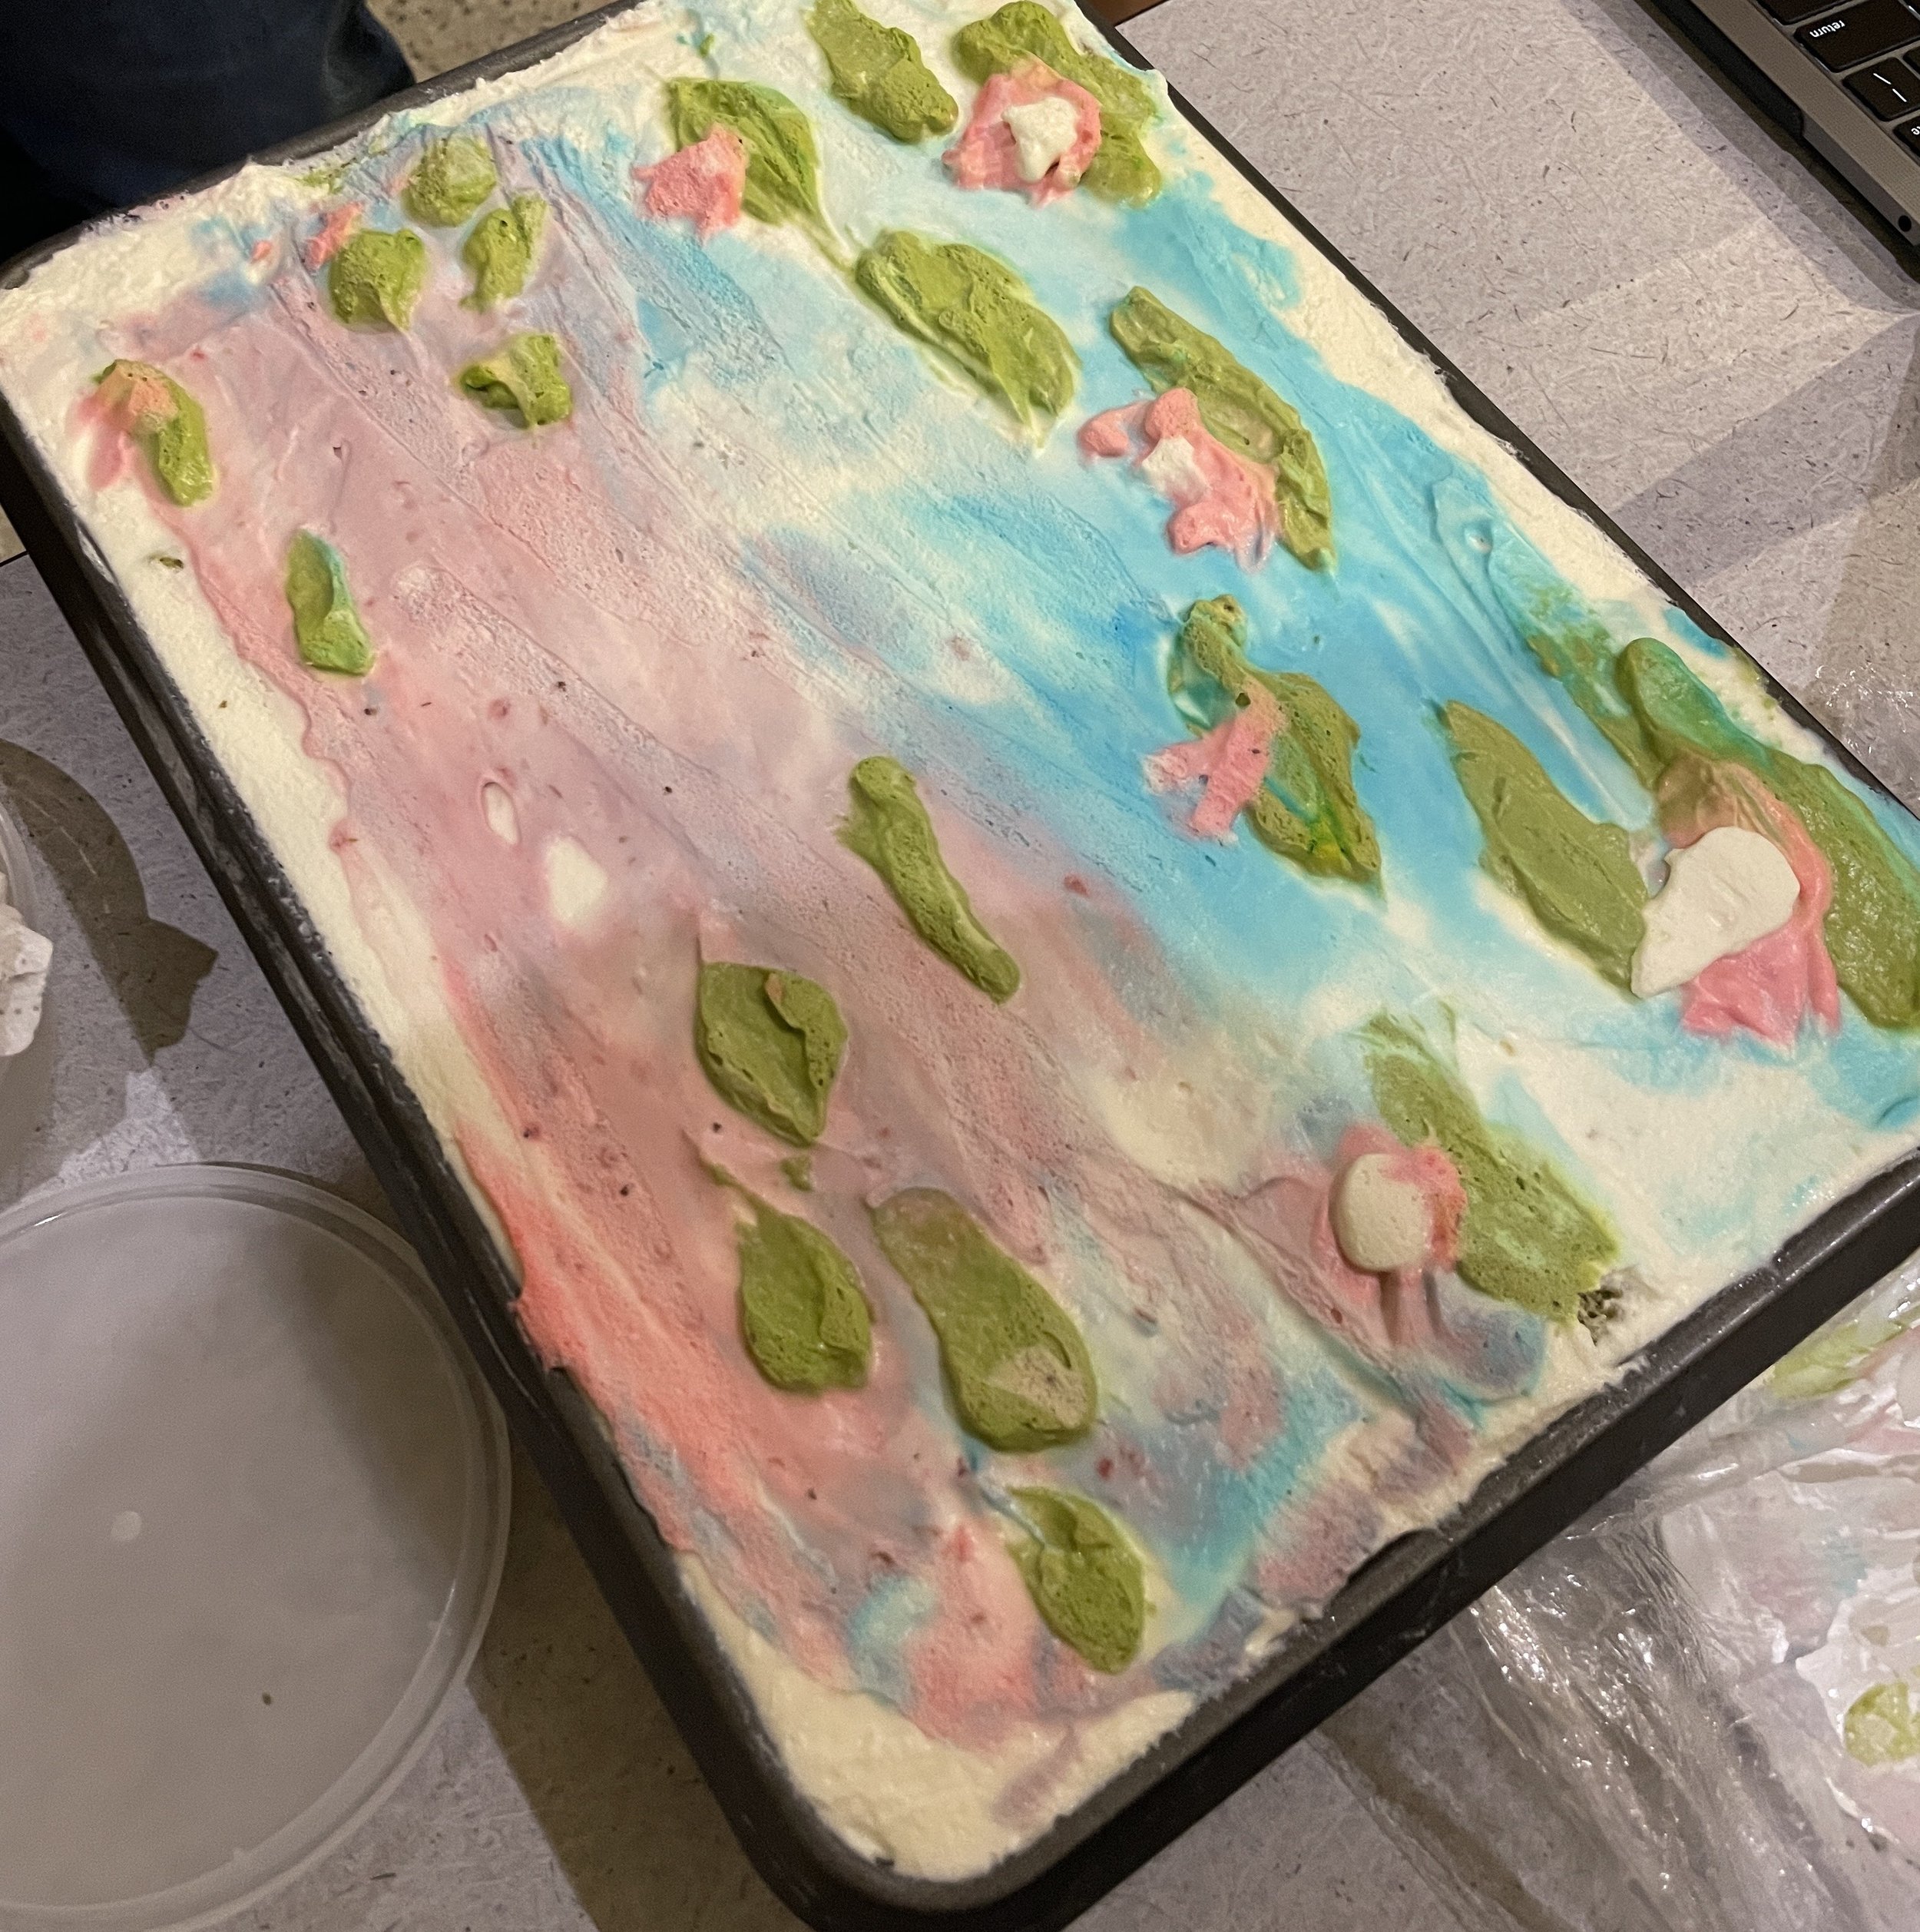 The cake that April made using leftover dessert materials